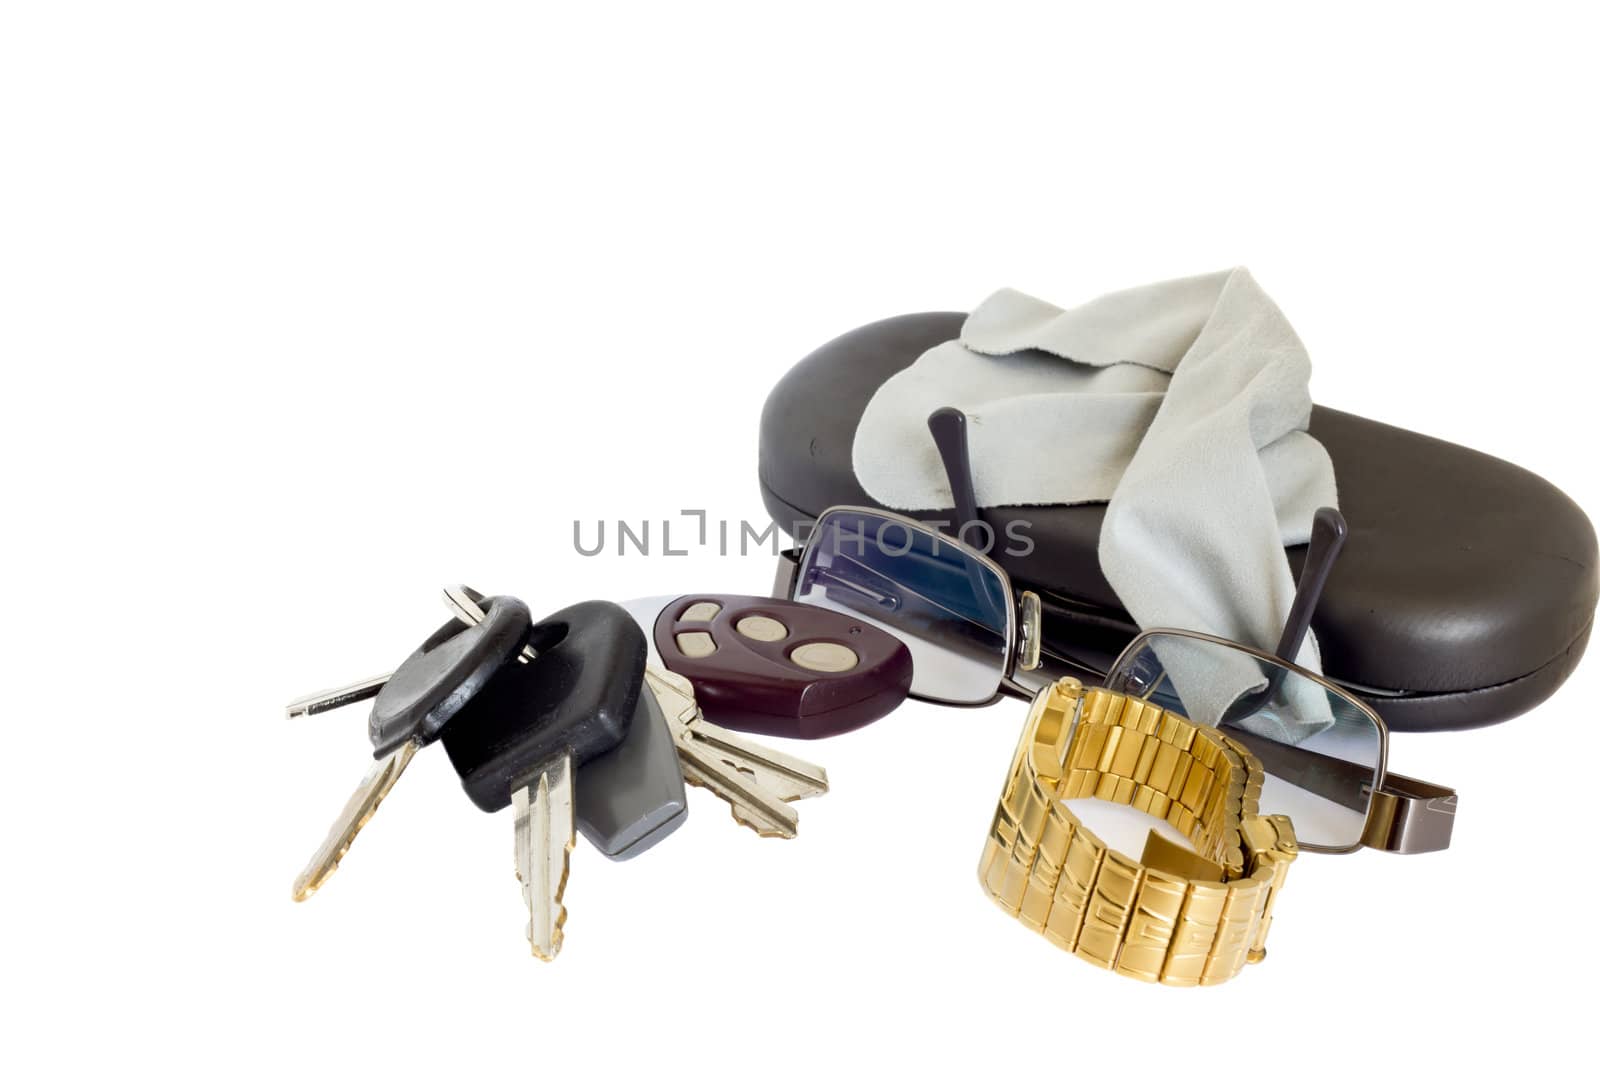 Car keys with an alarm remote next to a pair of glasses, a watch and a case